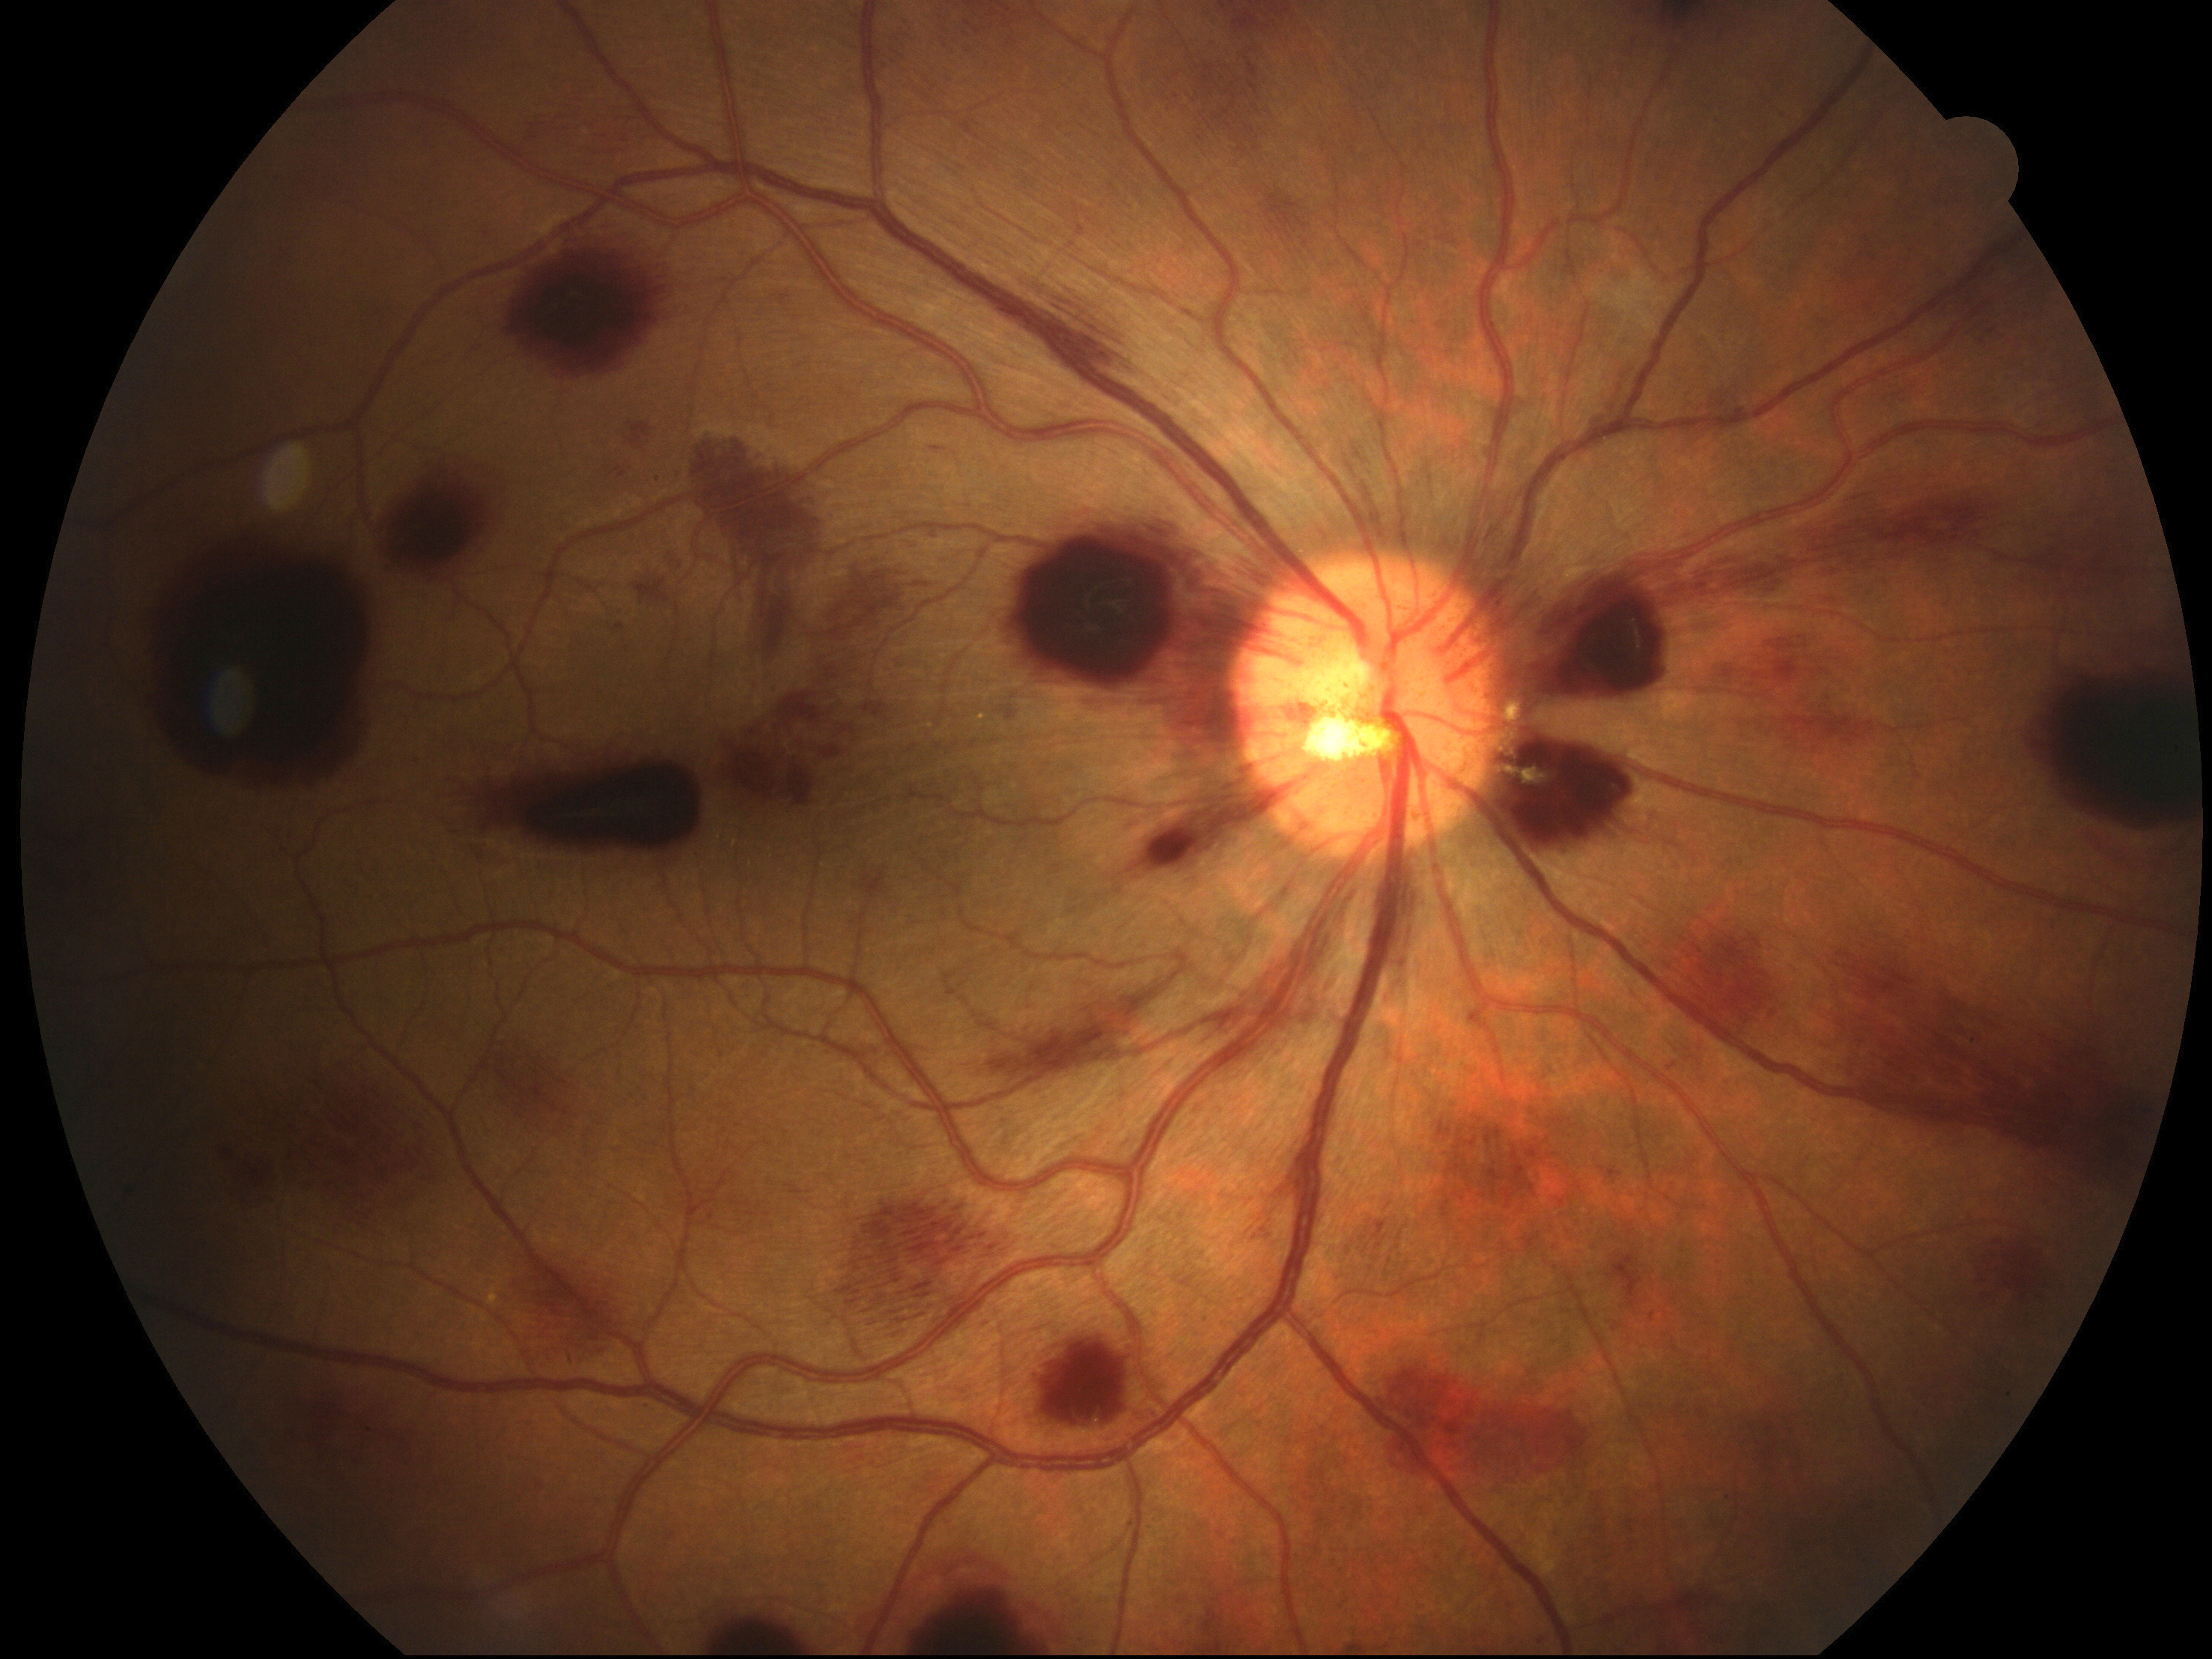 Figure 2.3.34 Retinal Haemorrhages in Patient with Hodgkin’s Lymphoma